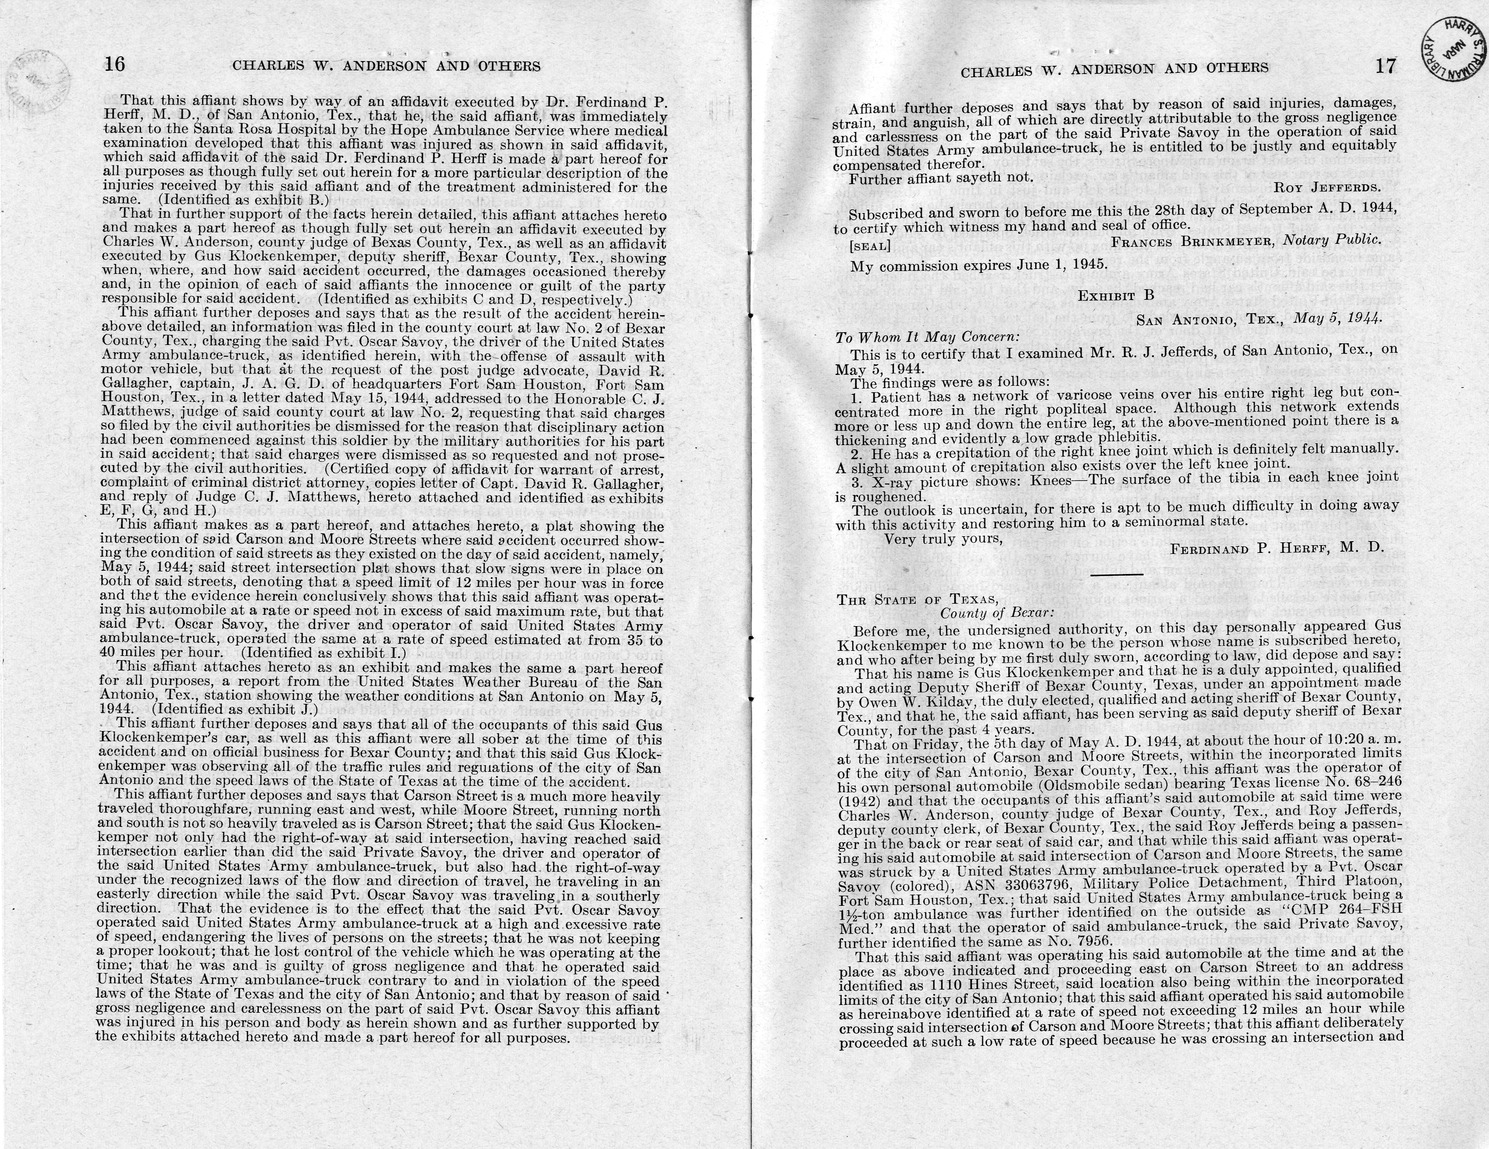 Memorandum from Frederick J. Bailey to M. C. Latta, H.R. 2306, For the Relief of Charles W. Anderson, Roy Jefferds, and Gus Klockenkemper, with Attachments